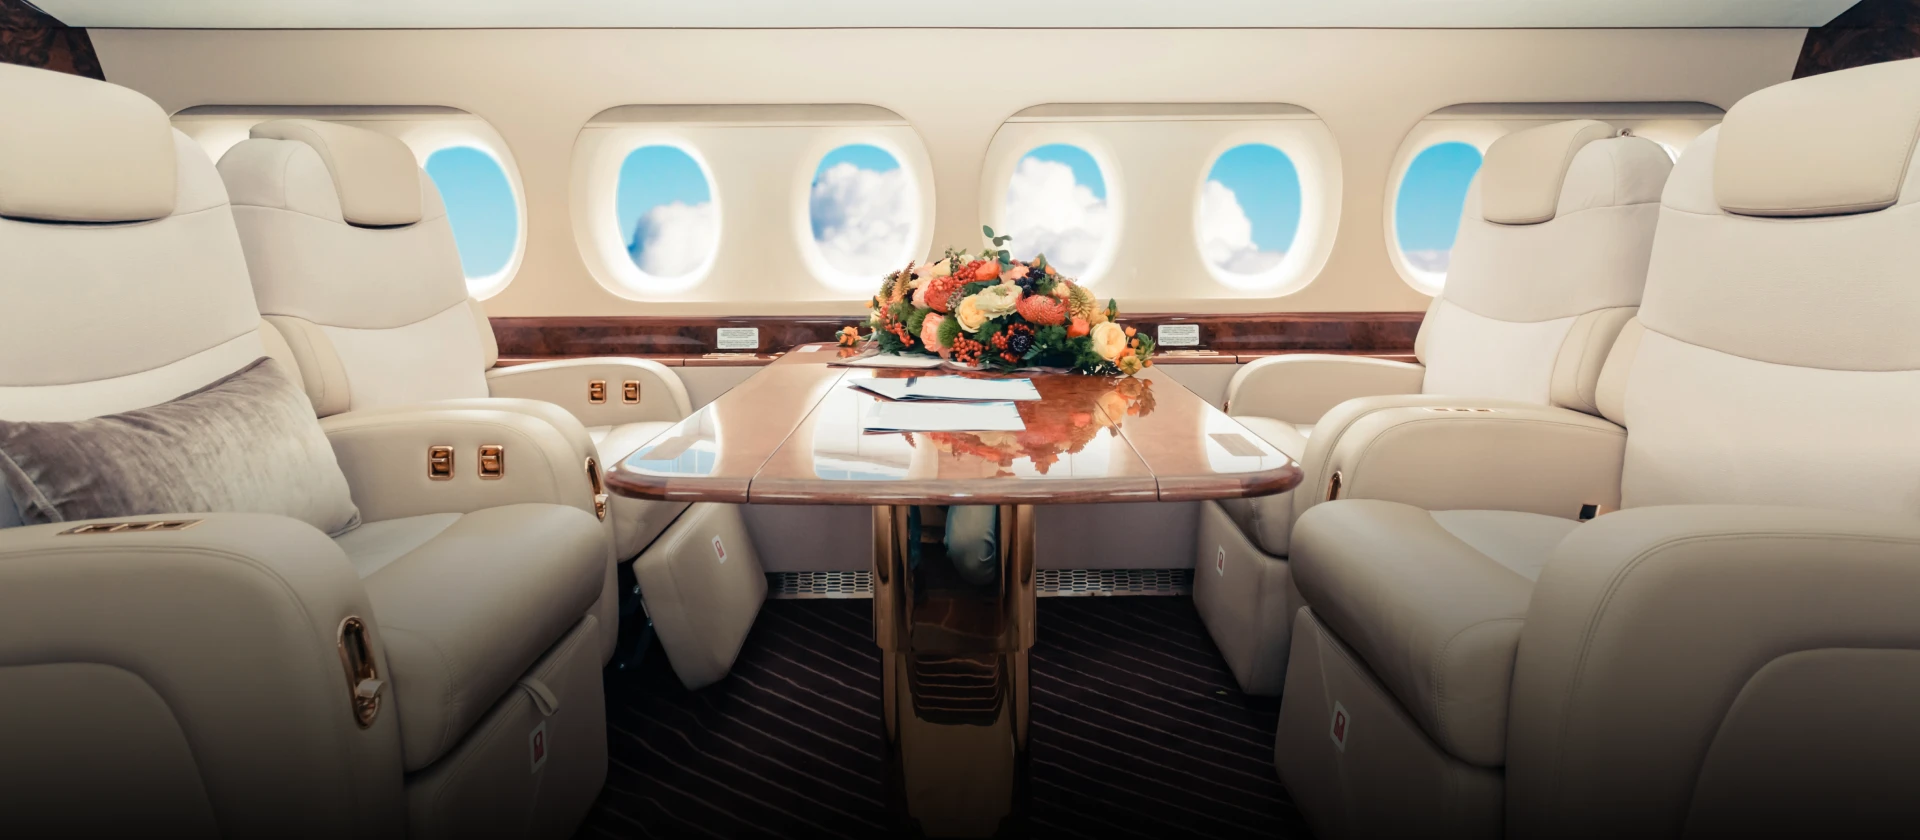 Indulge in Ocean Jets premium Private Jet Services in the USA, including exquisite Private Jet Catering